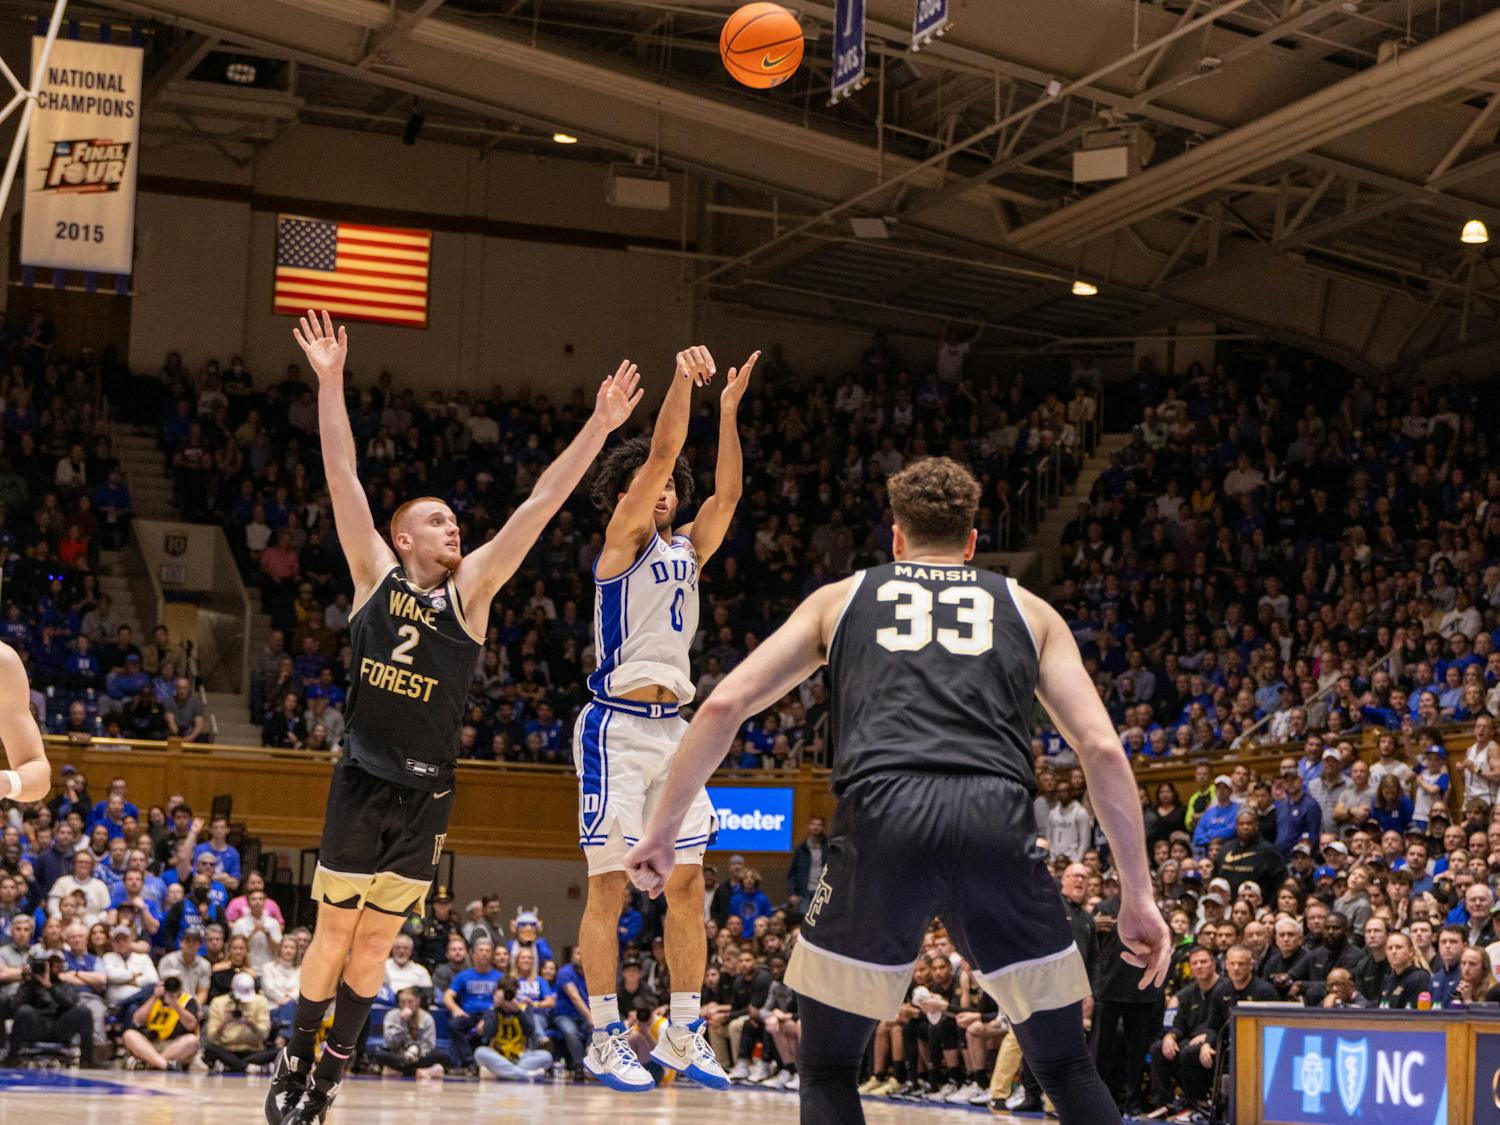 Jared McCain unleashes a shot from three during Duke's win against Wake Forest.